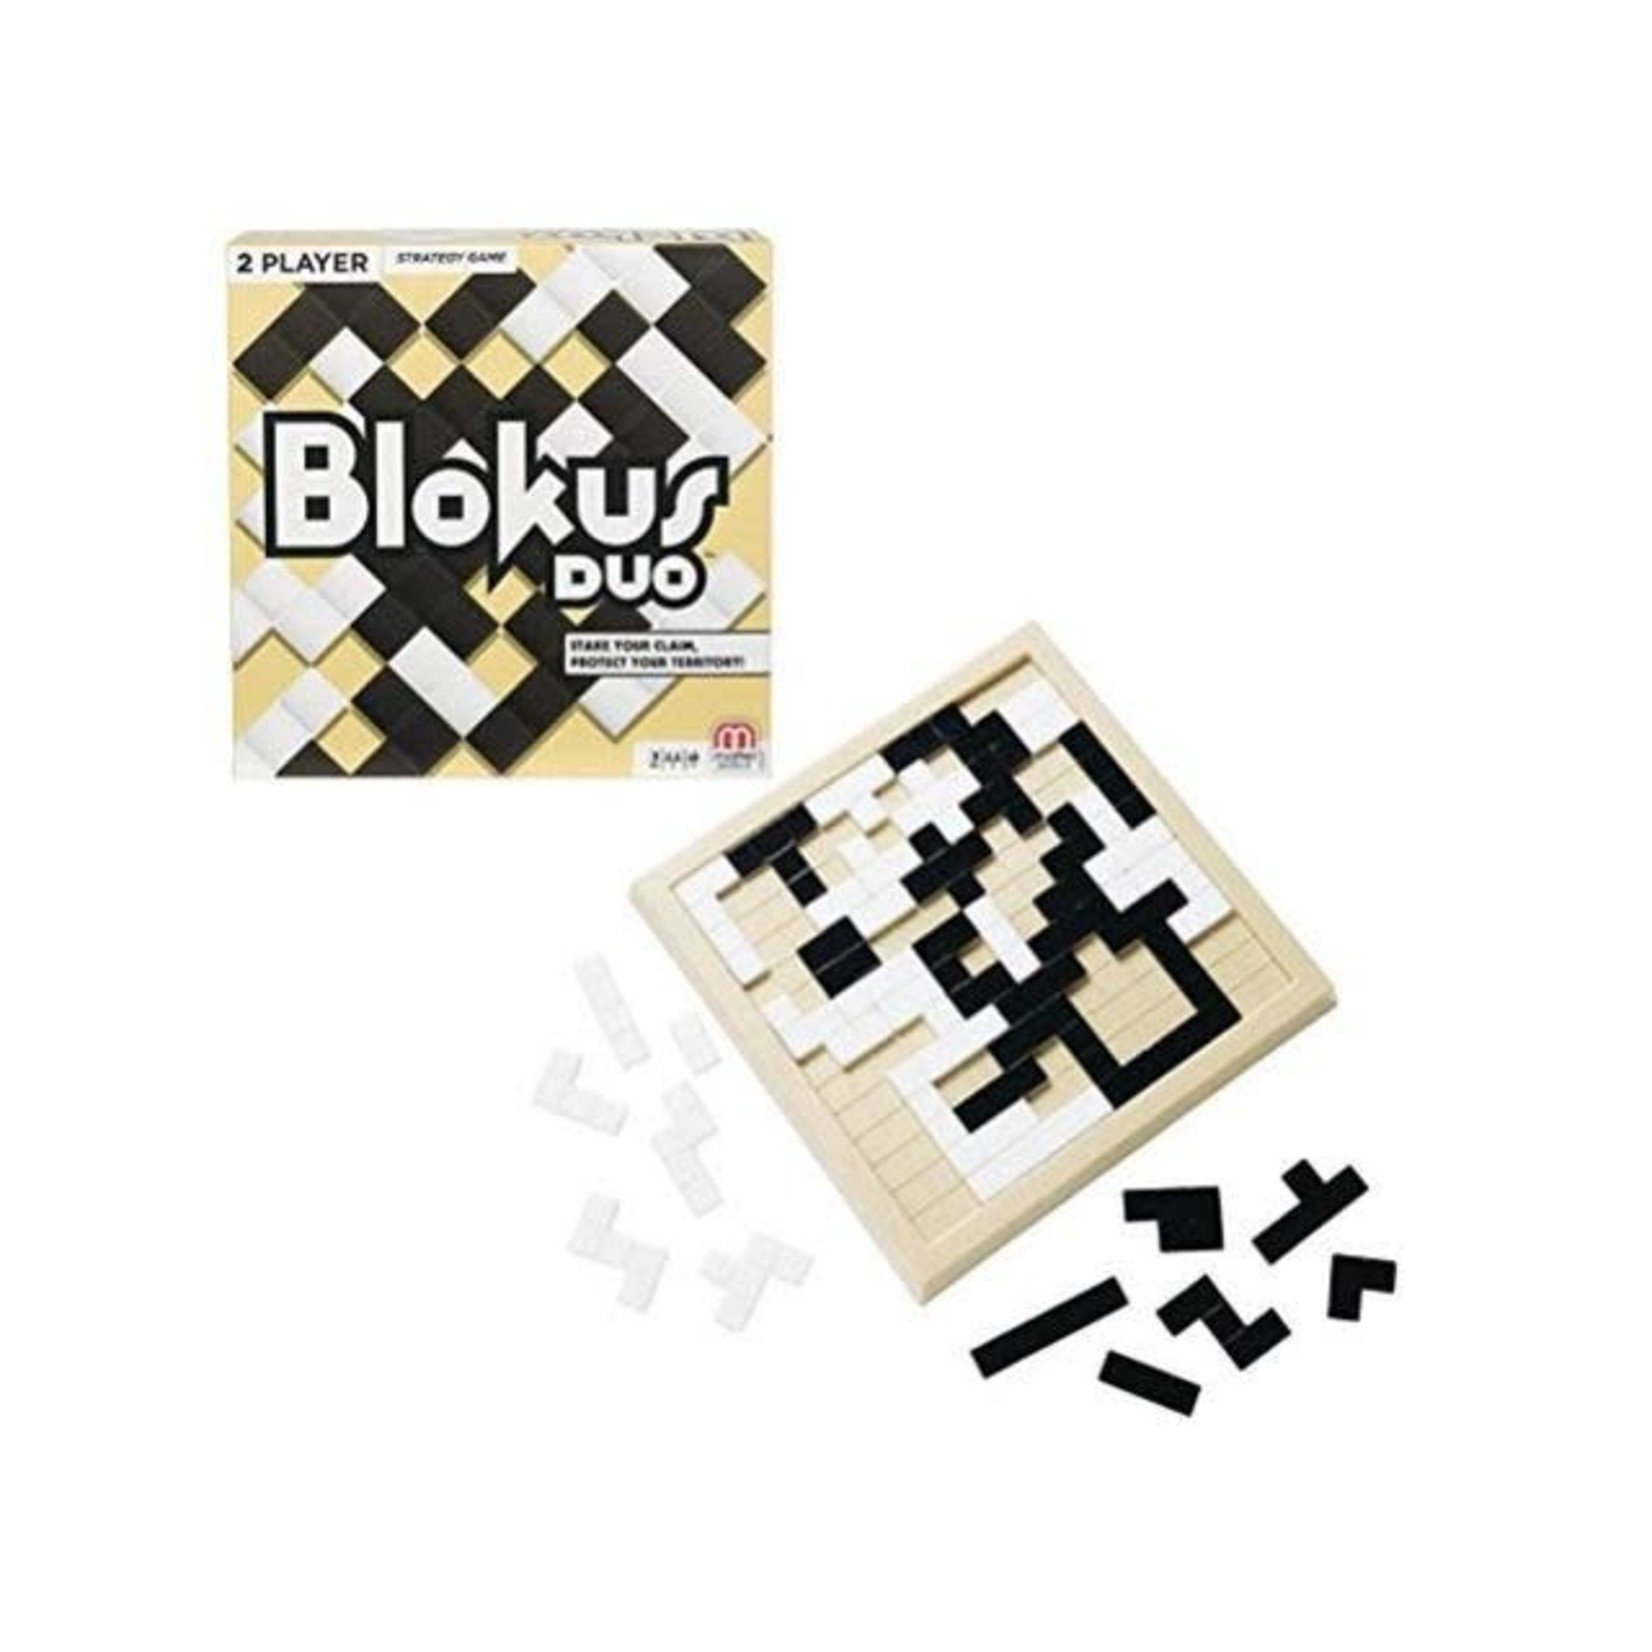 BLOKUS DUO Board Game Mattel Games 2008 R1984 2-Players New Sealed. 